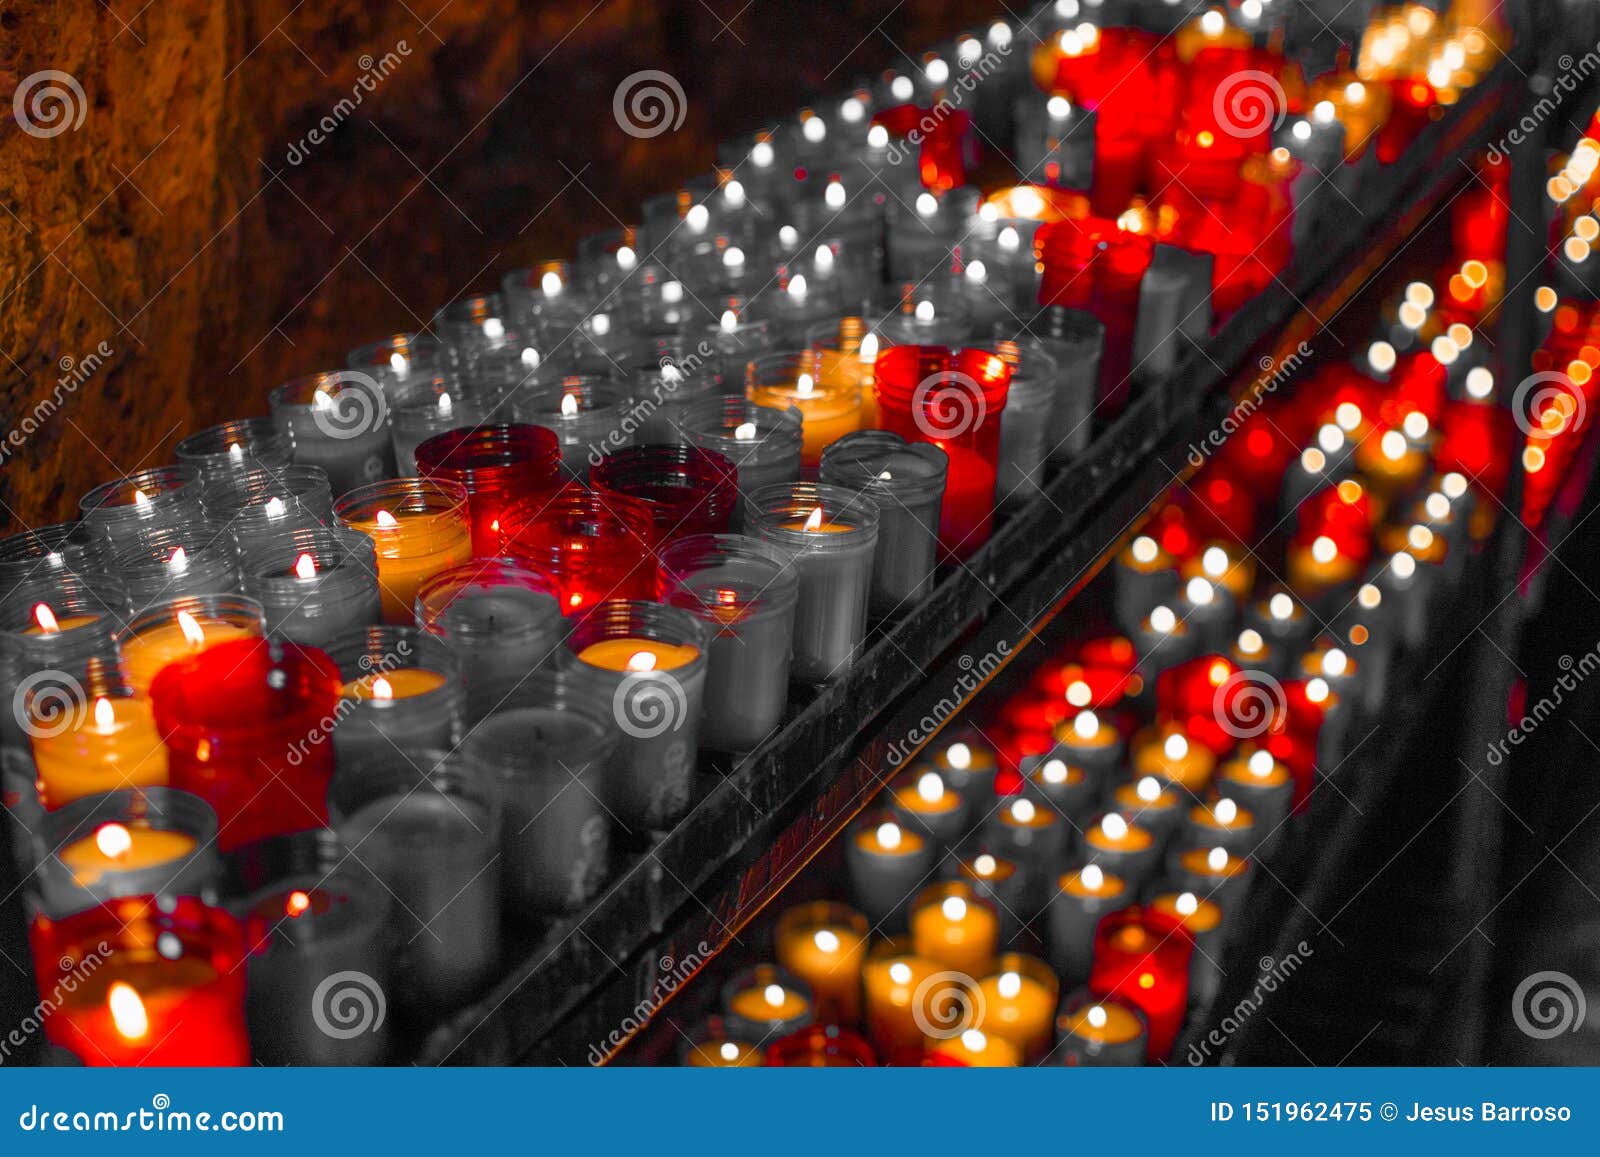 desaturated red close up of colorful candles in a dark spiritual scene. commemoration, funeral, memorial. religious ism